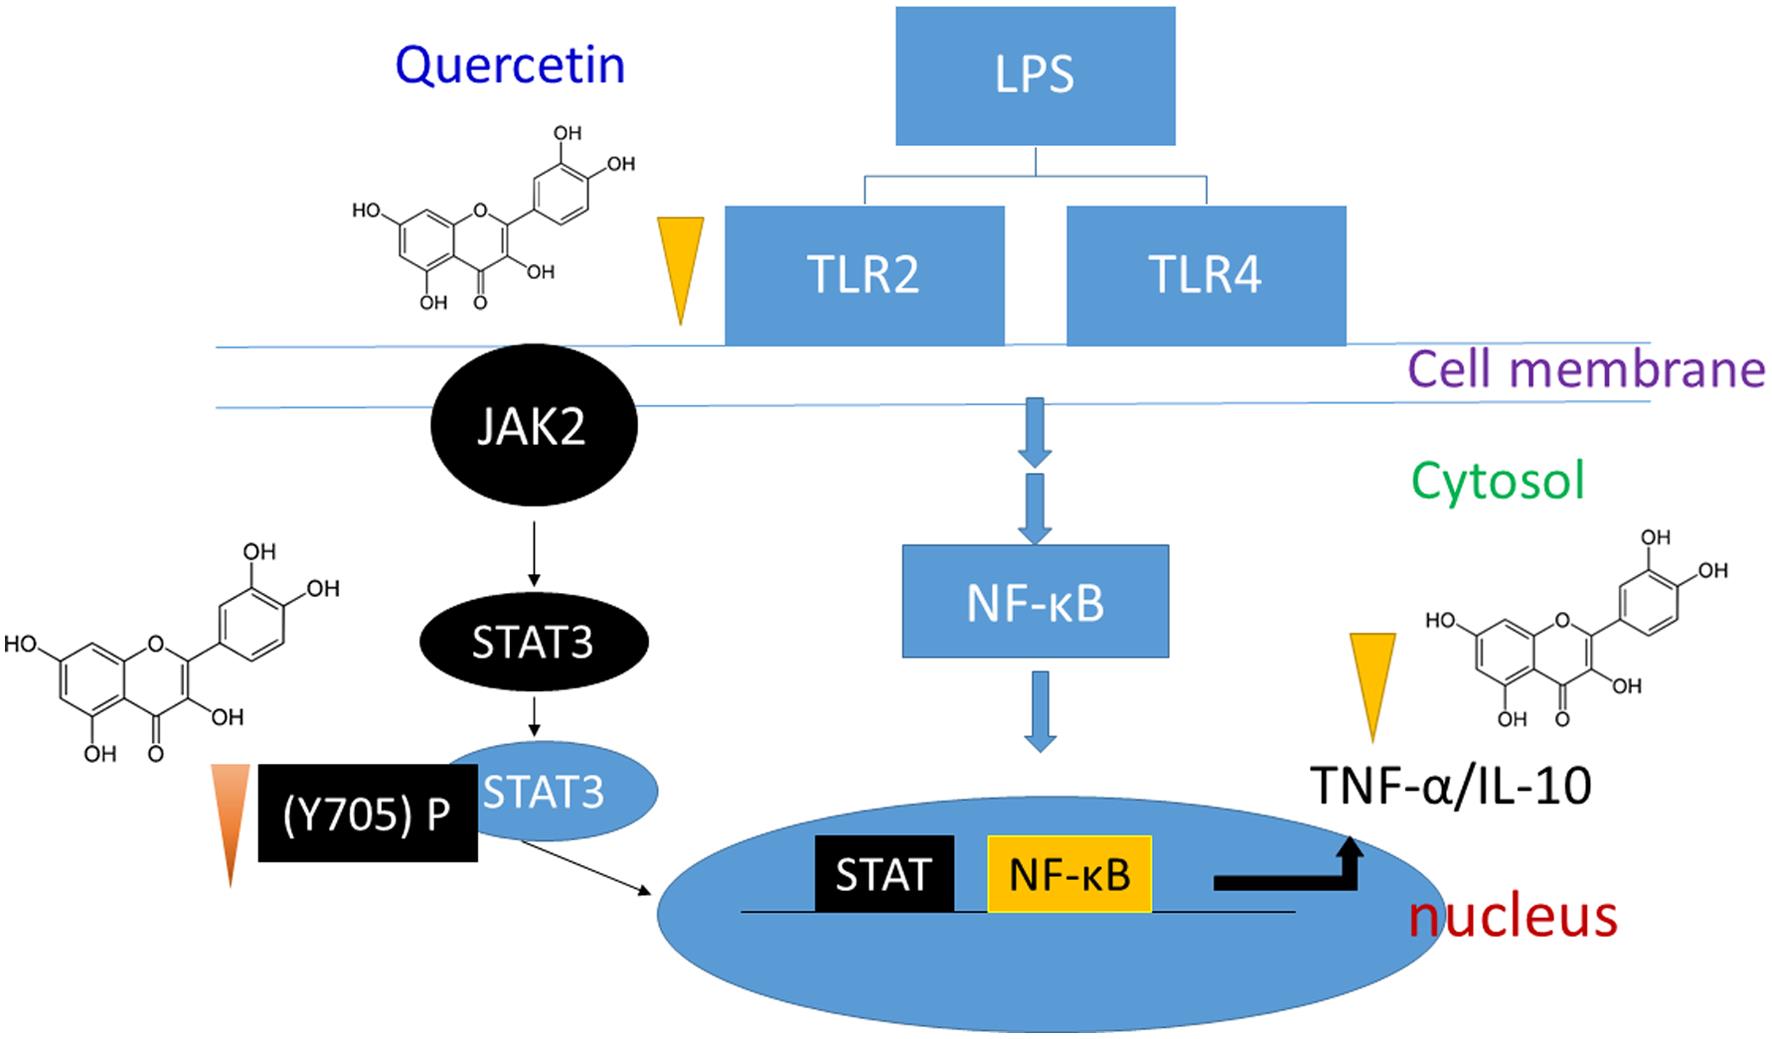 Proposed effects of quercetin on the cell signaling in inflamed macrophages.